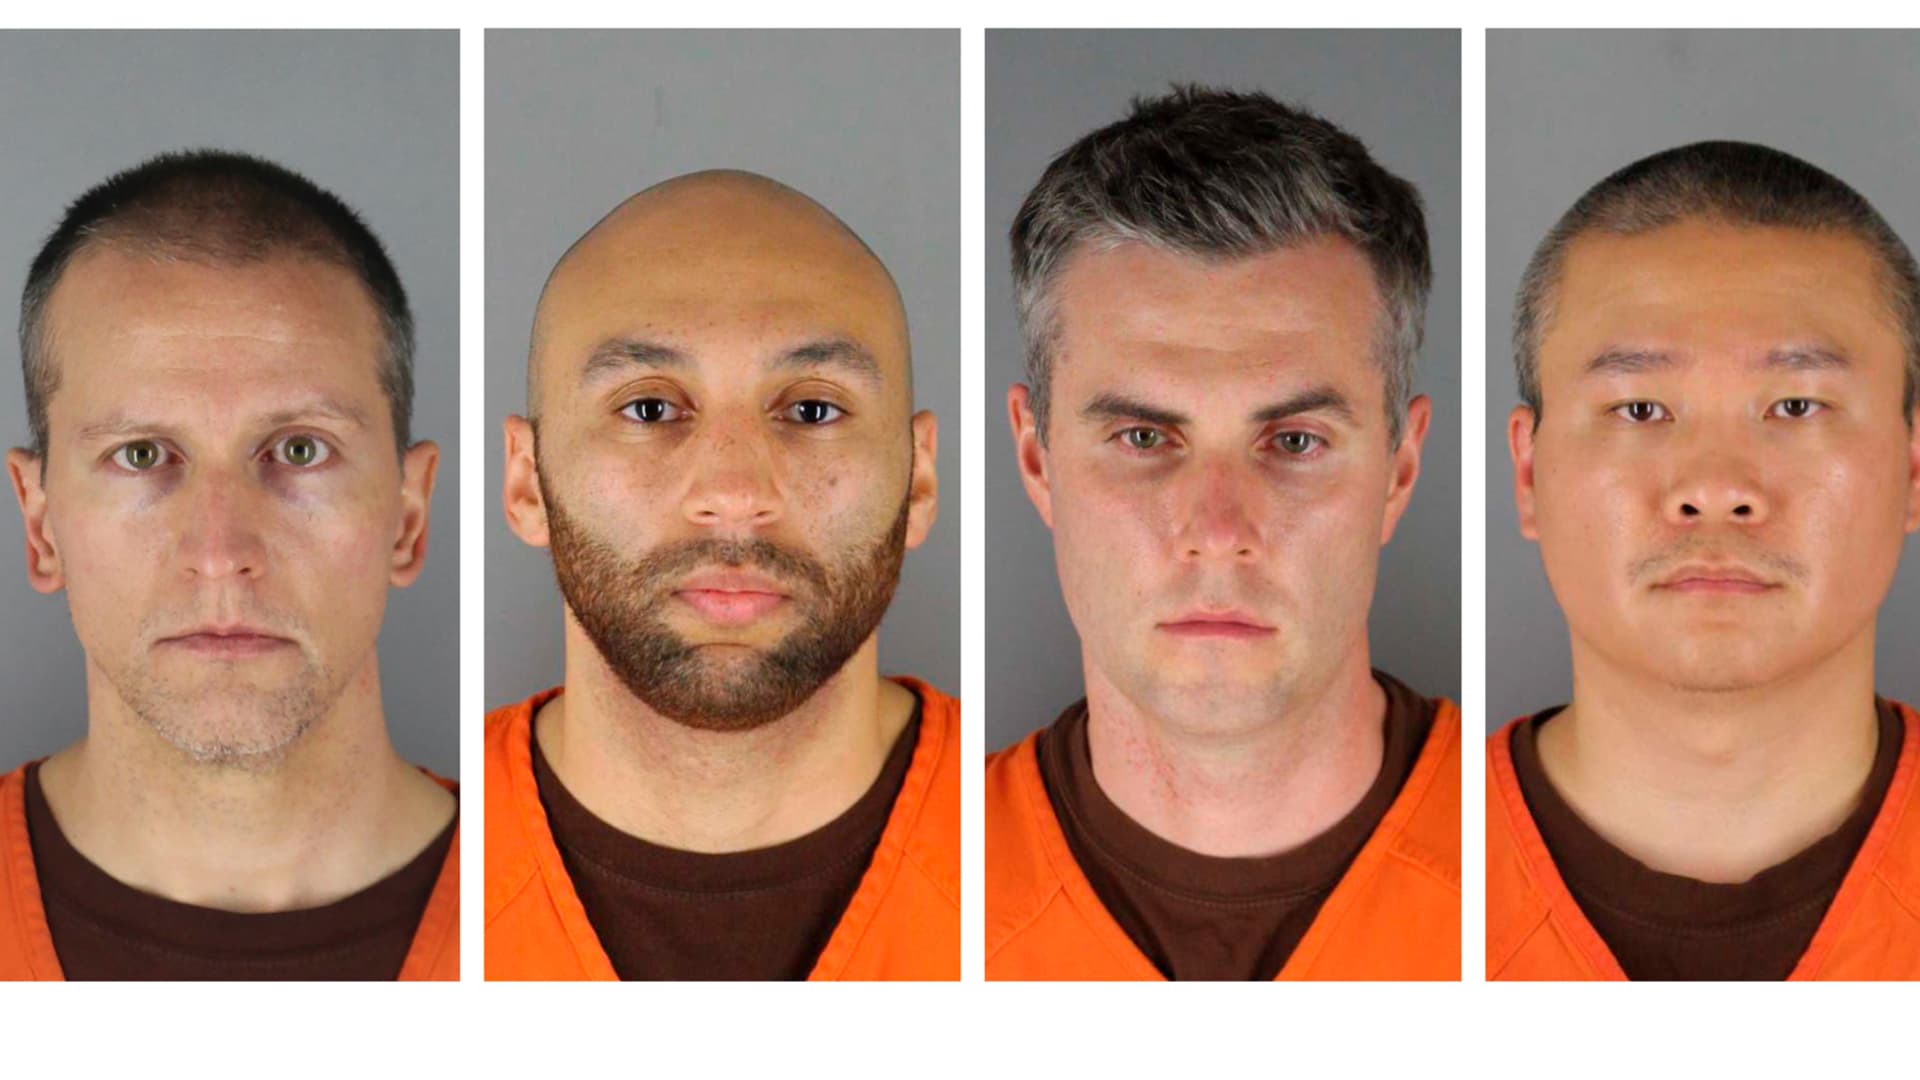 This combination of photos provided by the Hennepin County Sheriff's Office in Minnesota on Wednesday, June 3, 2020, shows Derek Chauvin, from left, J. Alexander Kueng, Thomas Lane and Tou Thao. Chauvin is charged with second-degree murder of George Floyd, a black man who died after being restrained by him and the other Minneapolis police officers on May 25. Kueng, Lane and Thao have been charged with aiding and abetting Chauvin.